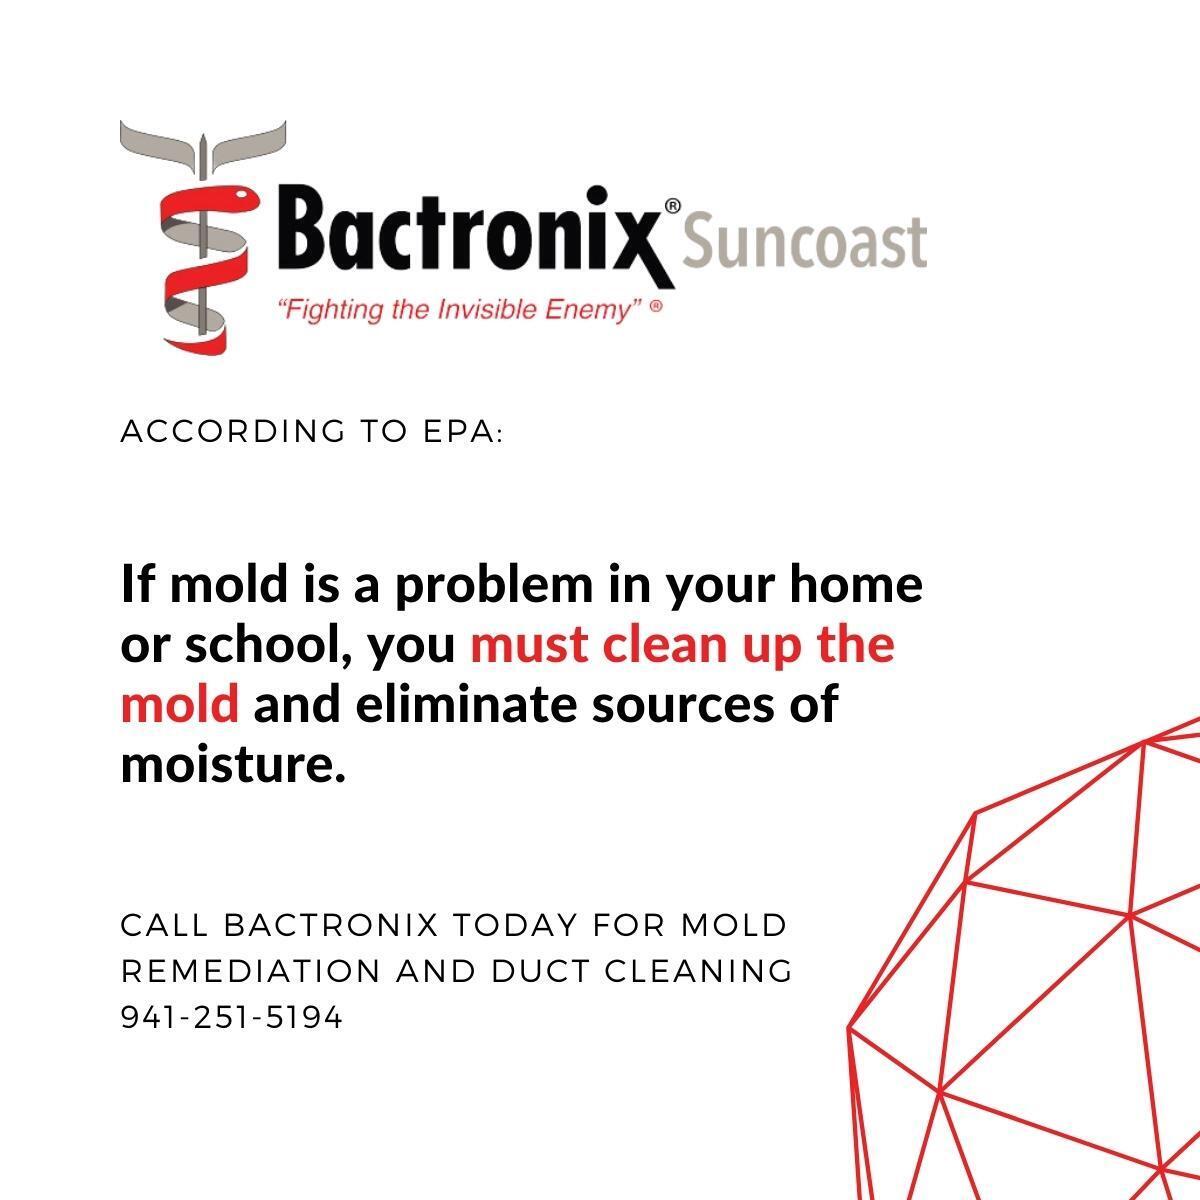 According to the EPA, if mold is a problem in your home or school, you must clean up the mold and eliminate sources of moisture. 

#DisinfectingService #BradentonBusiness #SarasotaBusiness #TampaBusiness #SupportLocalBradenton   #mold #MoldRemediation #ductcleaning